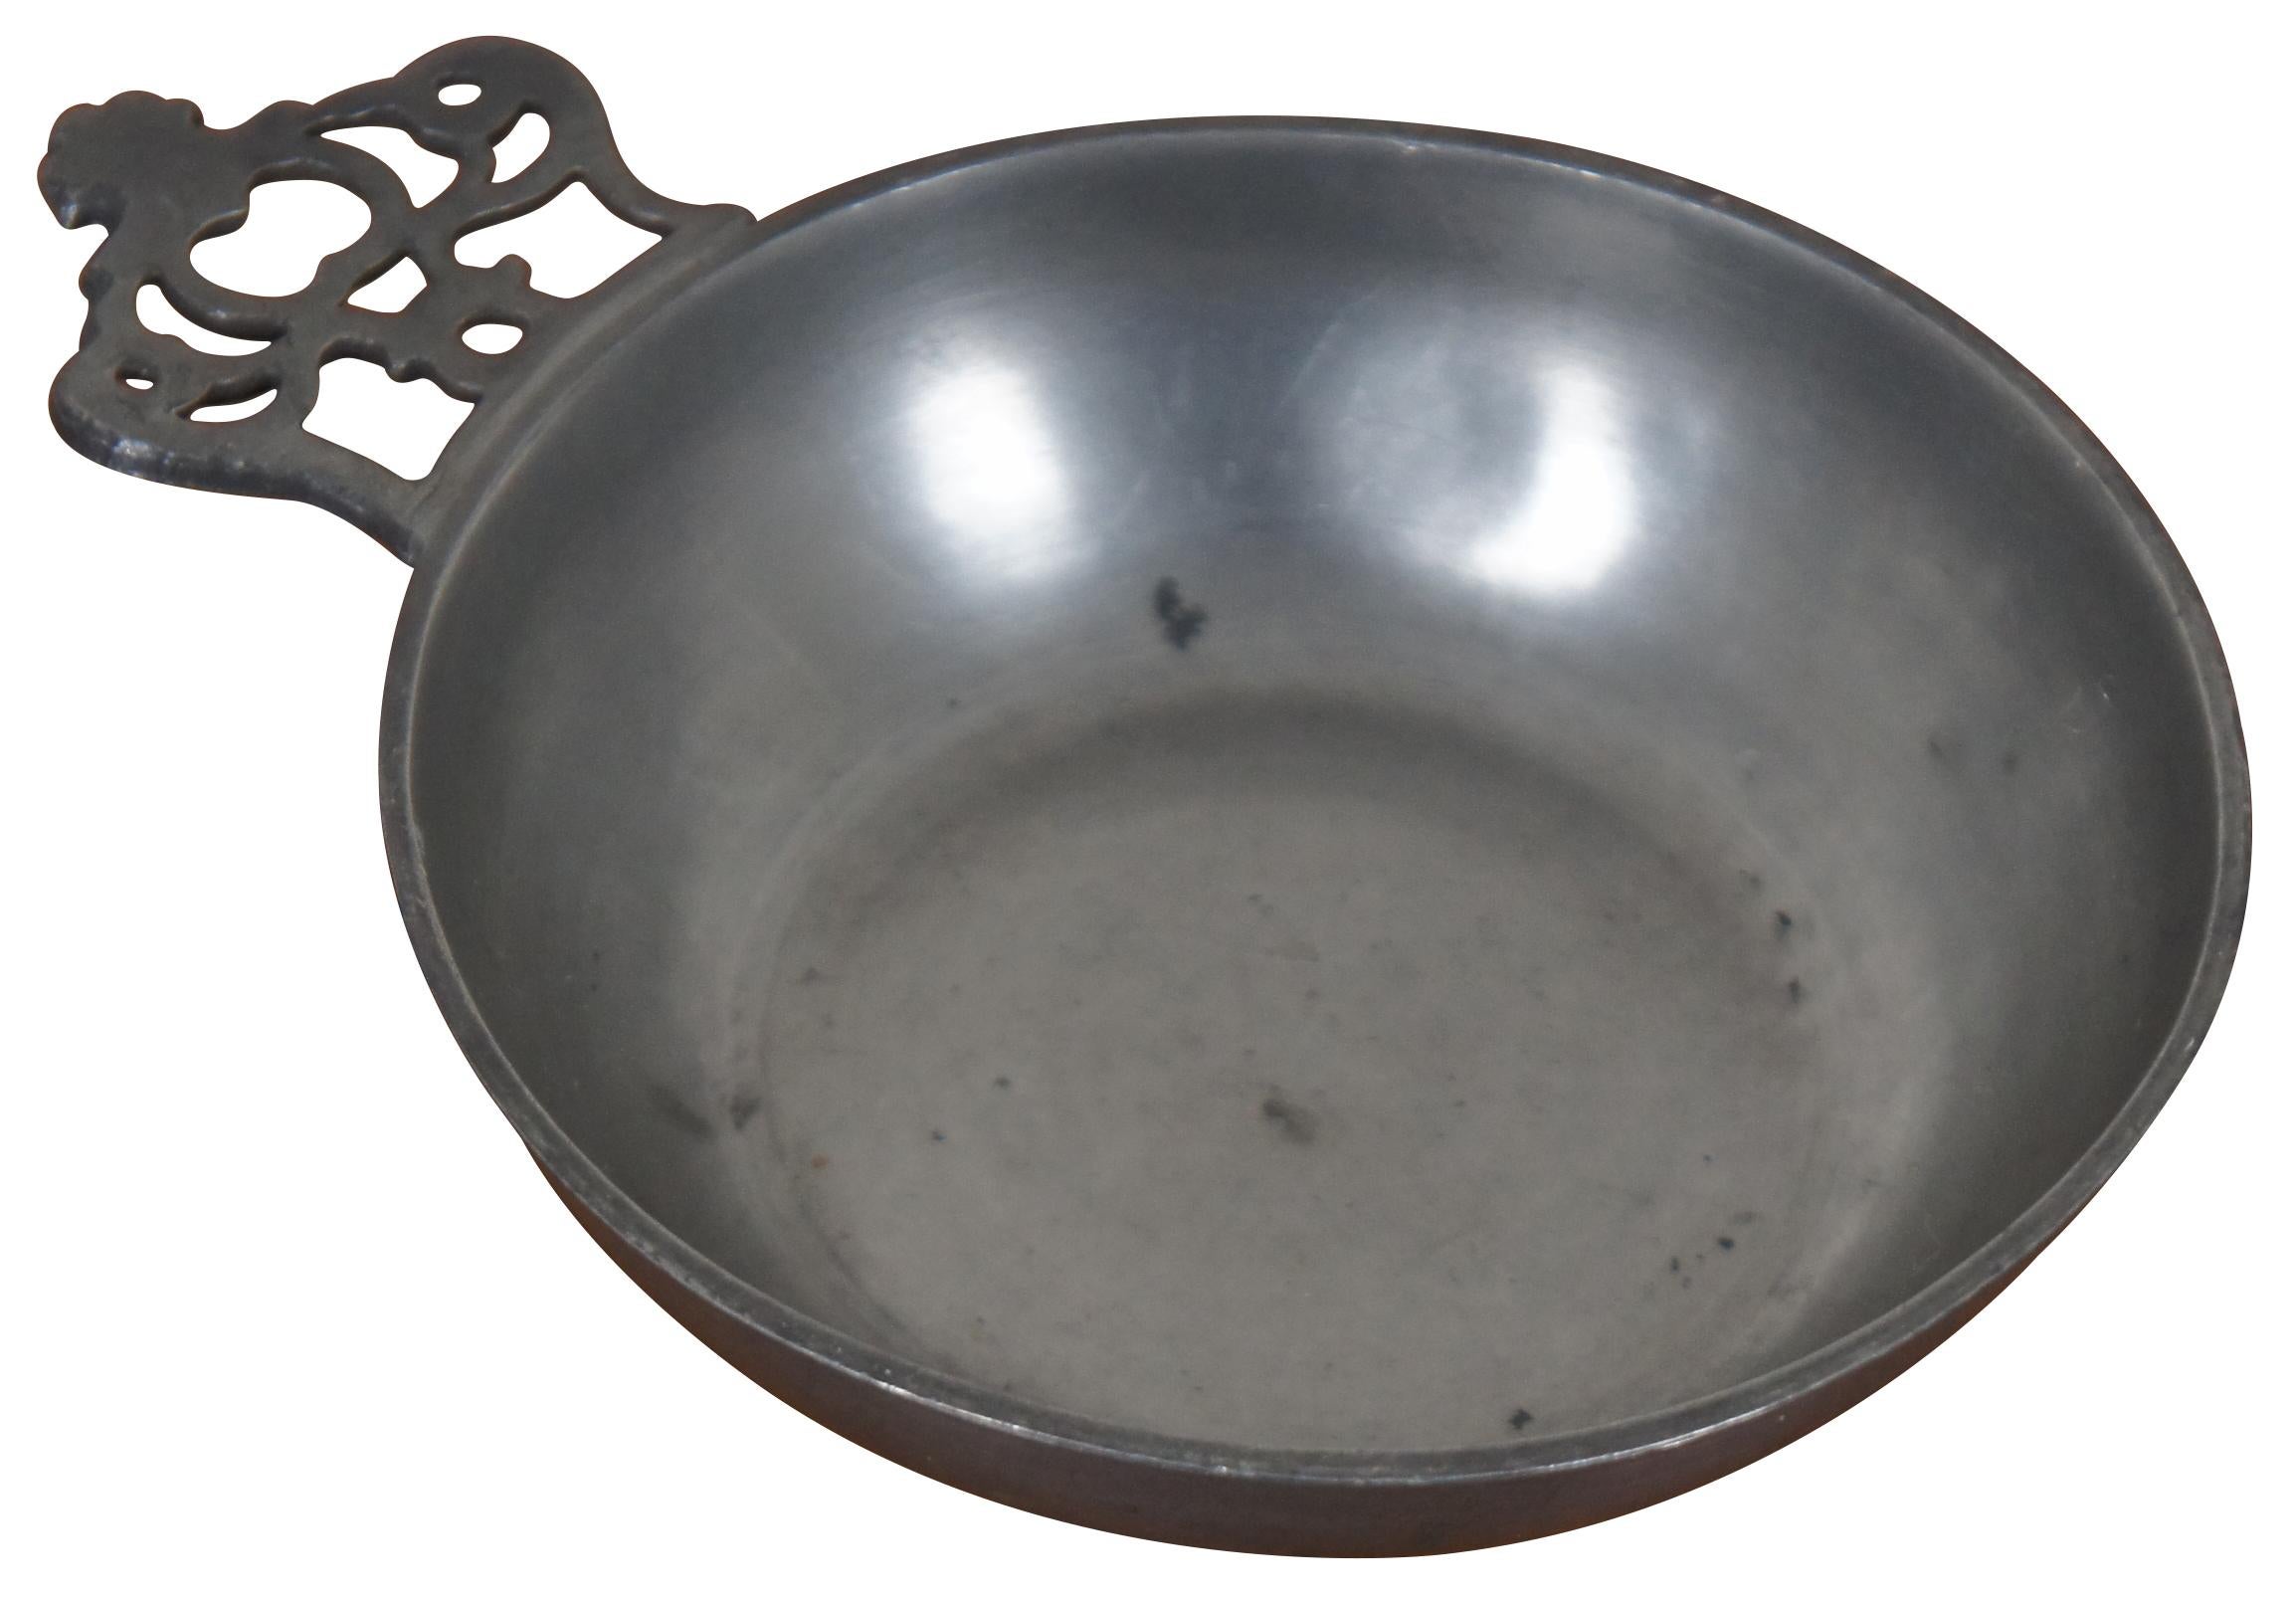 Late 18th Century Antique English Georgian pewter porringer soup or stew bowl, dish or cup with crown handle / ear by William Wright of Little Minories, London, England. Wright was elected to the London Guild in 1764.
 